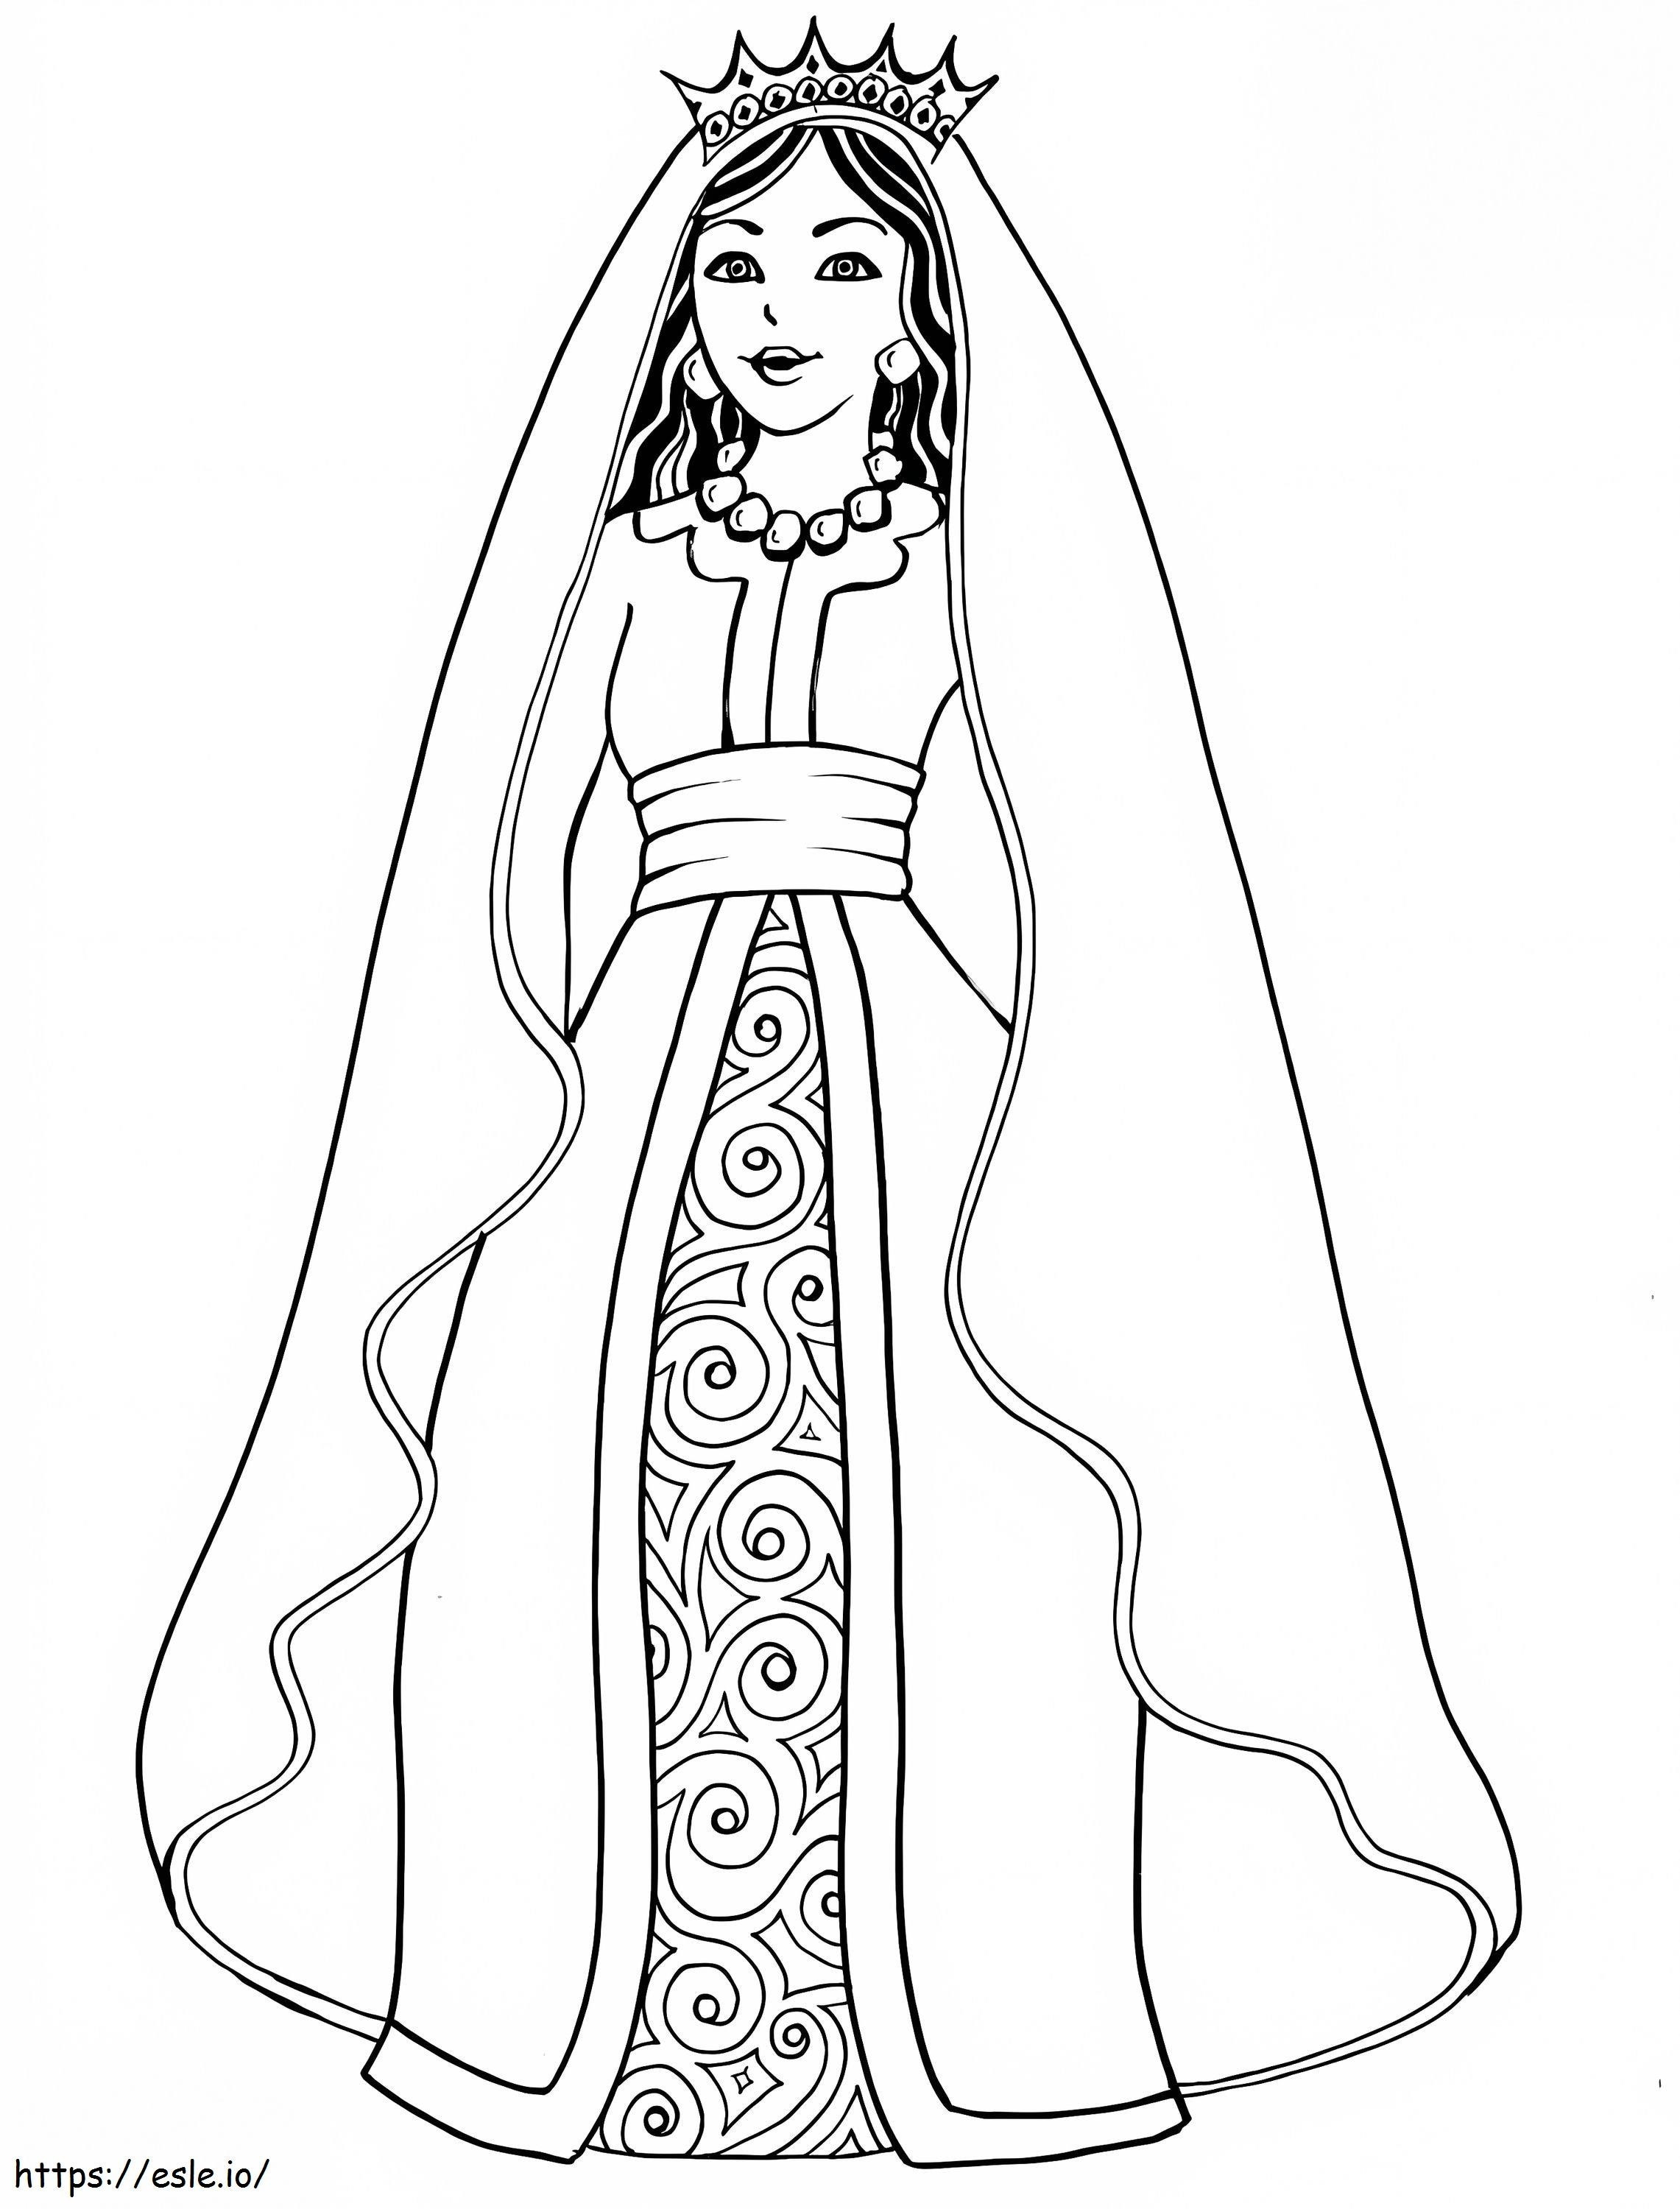 Glorious Queen coloring page